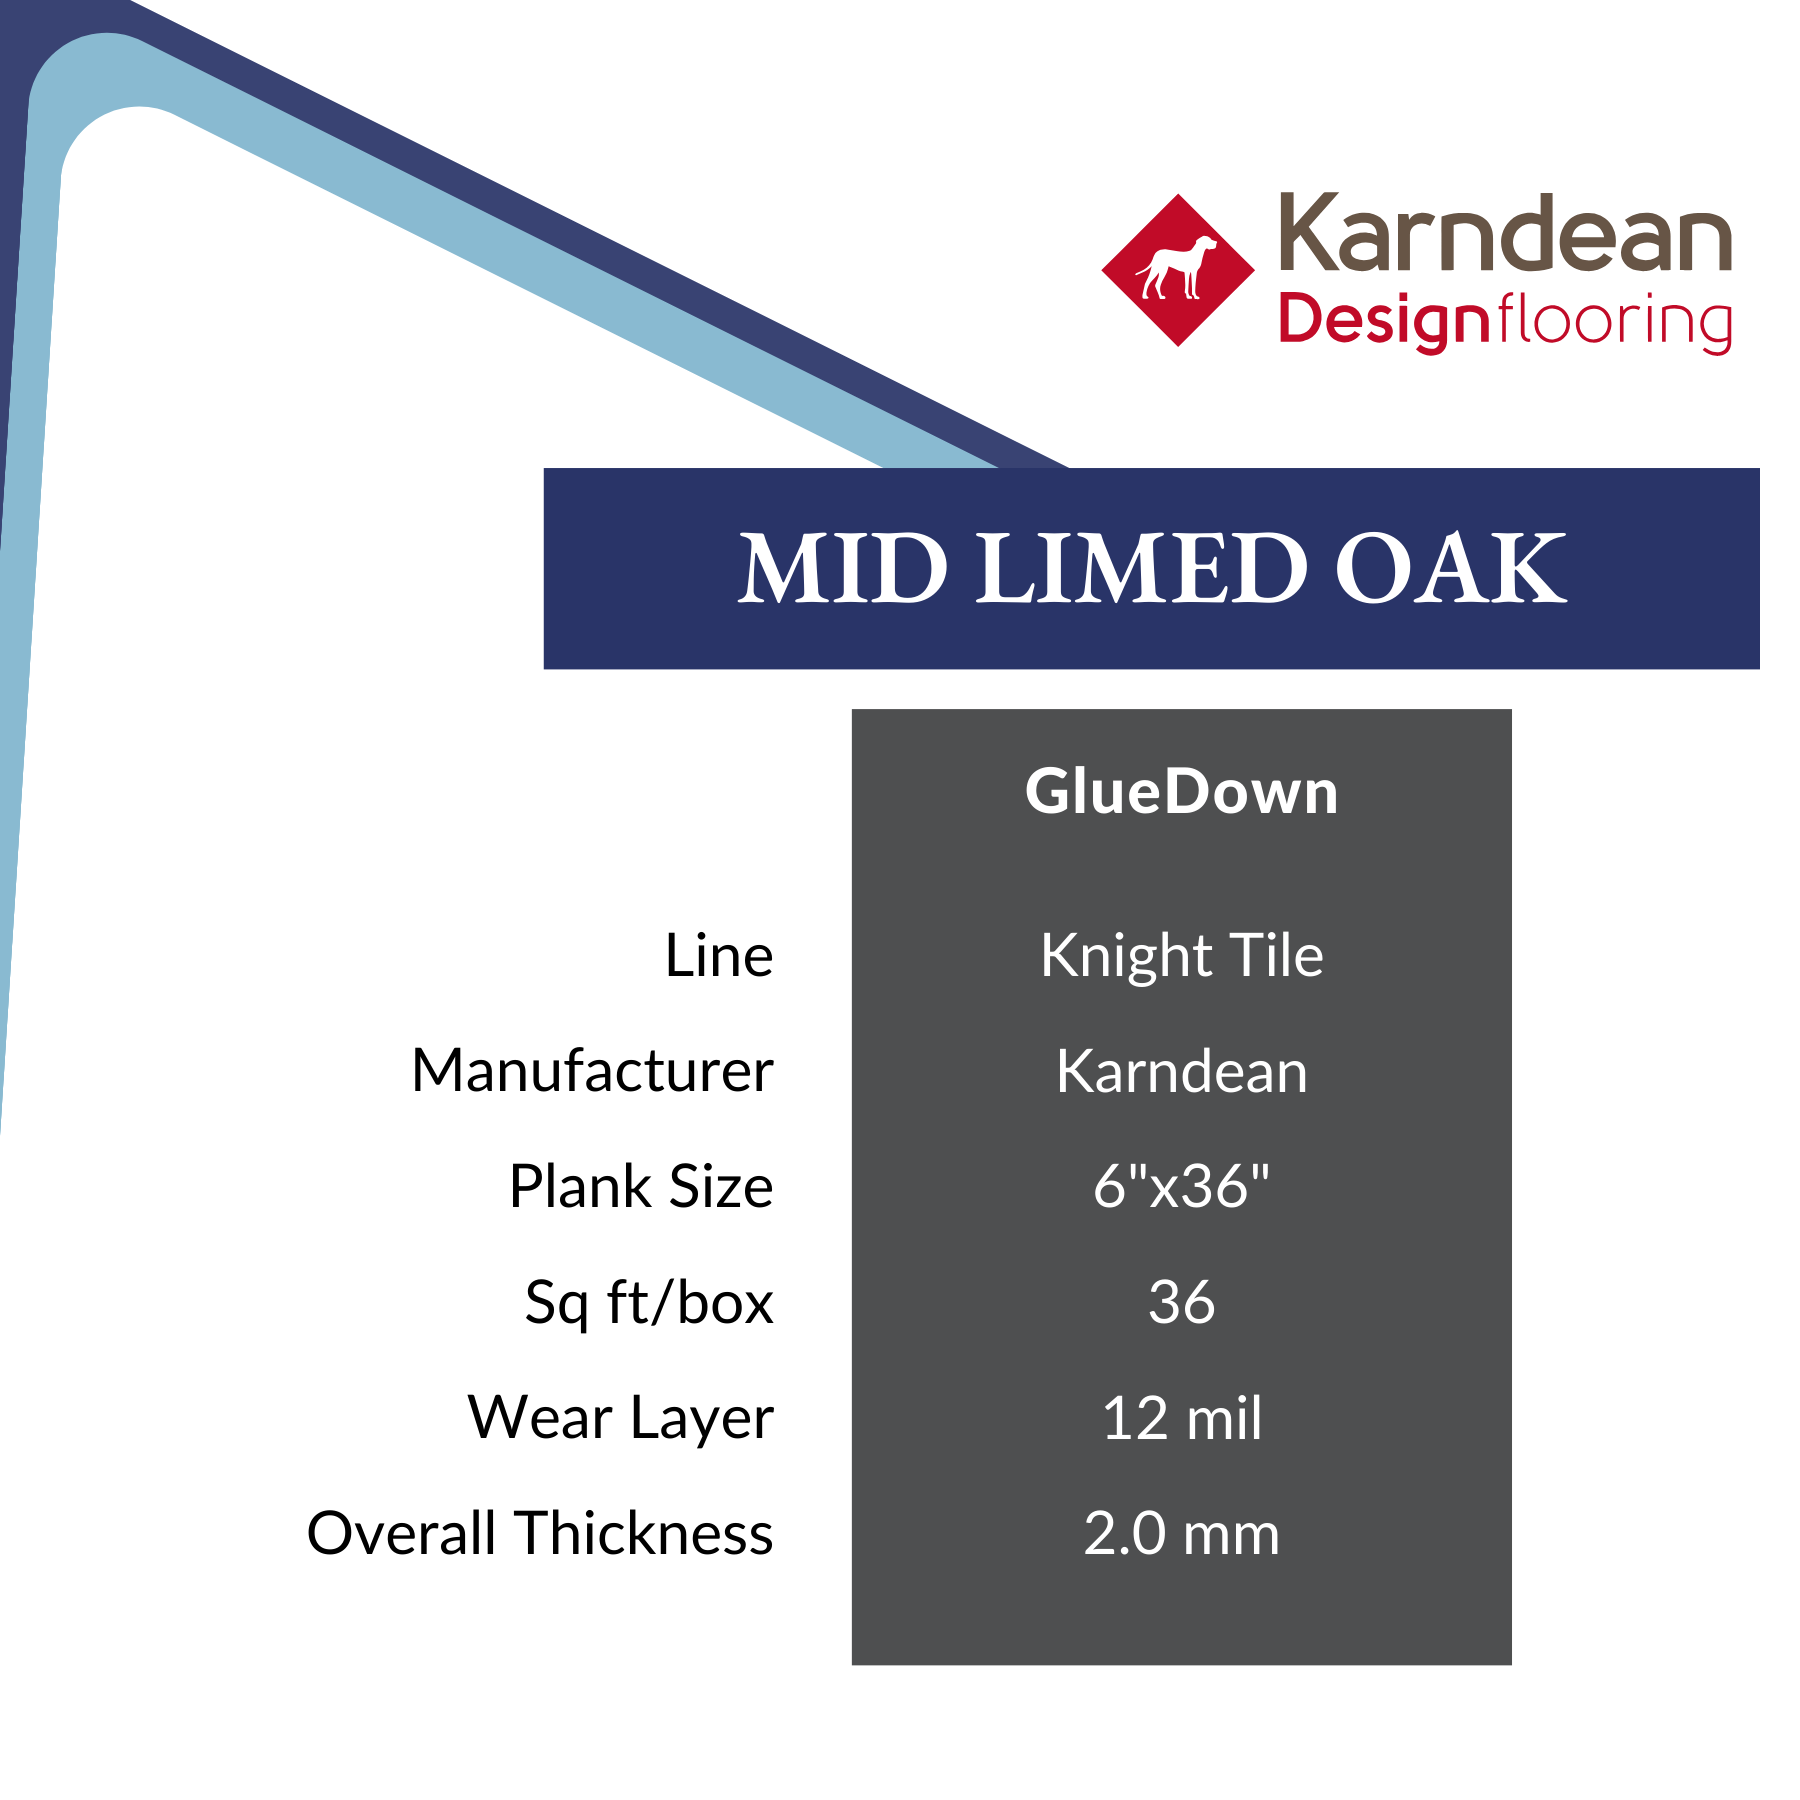 Mid Limed oak by Karndean Clearance at Calhoun's Flooring in Springdfield, IL Specs